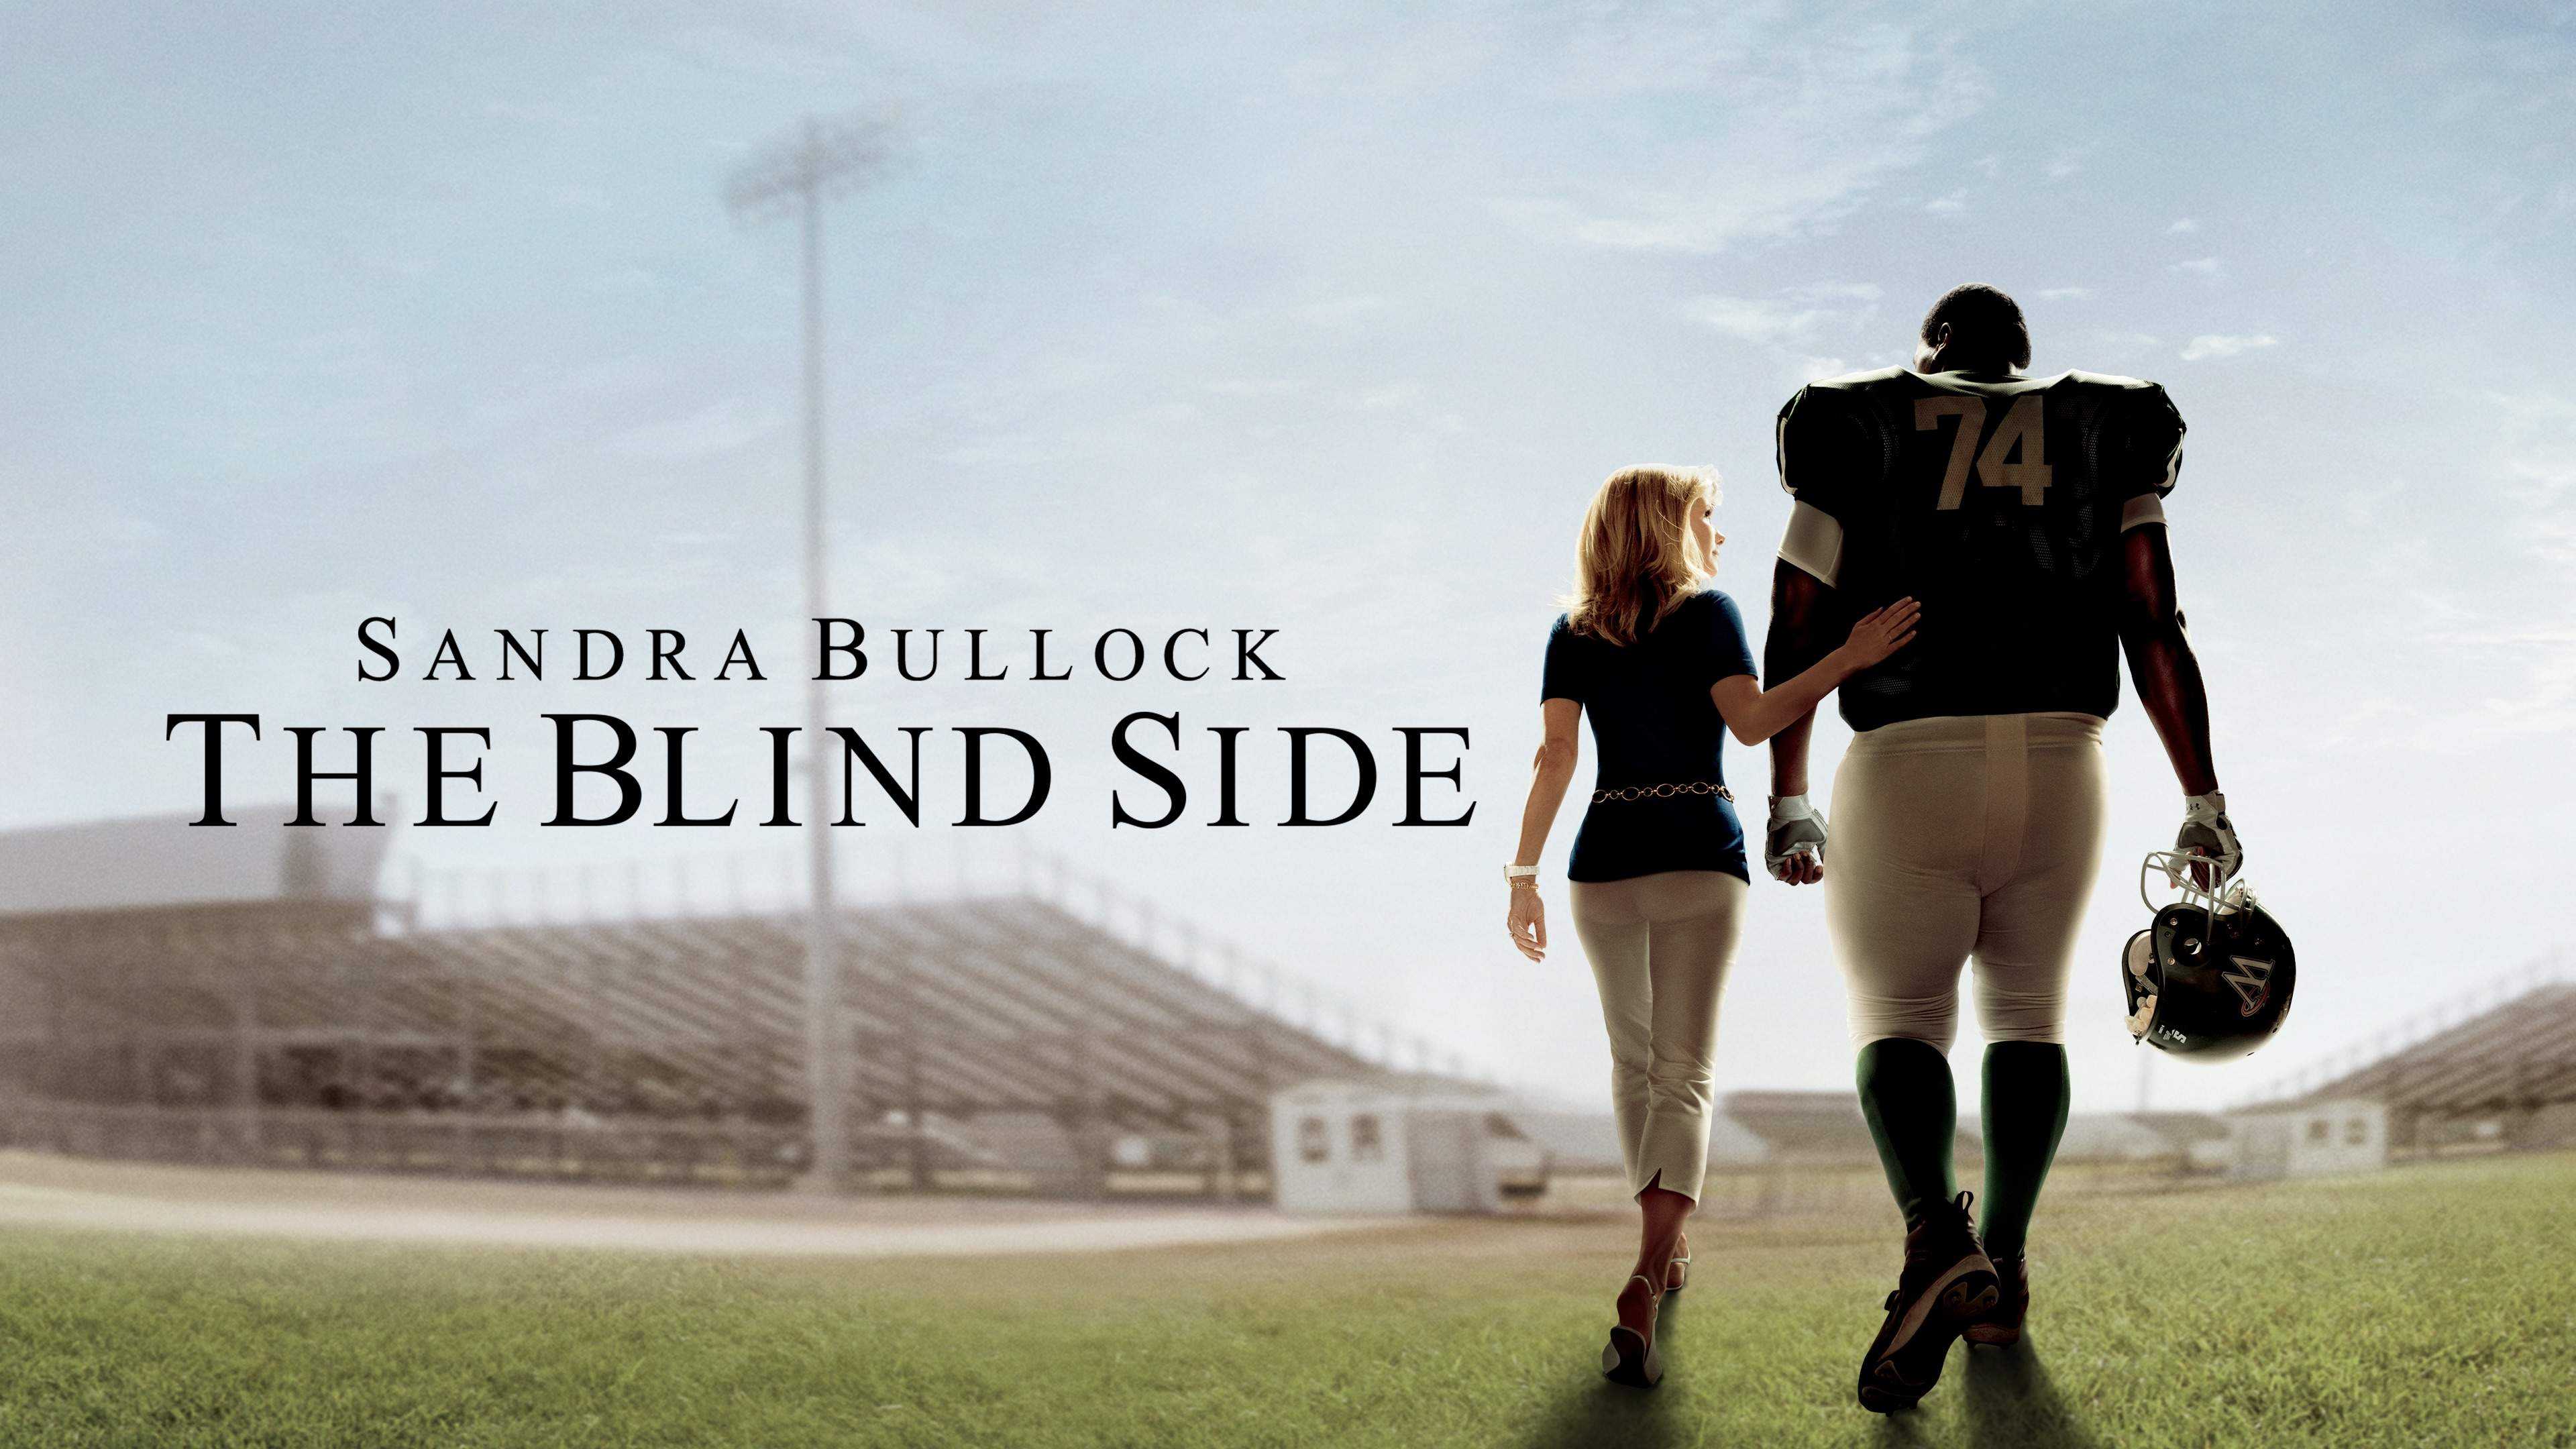 The blind side parody